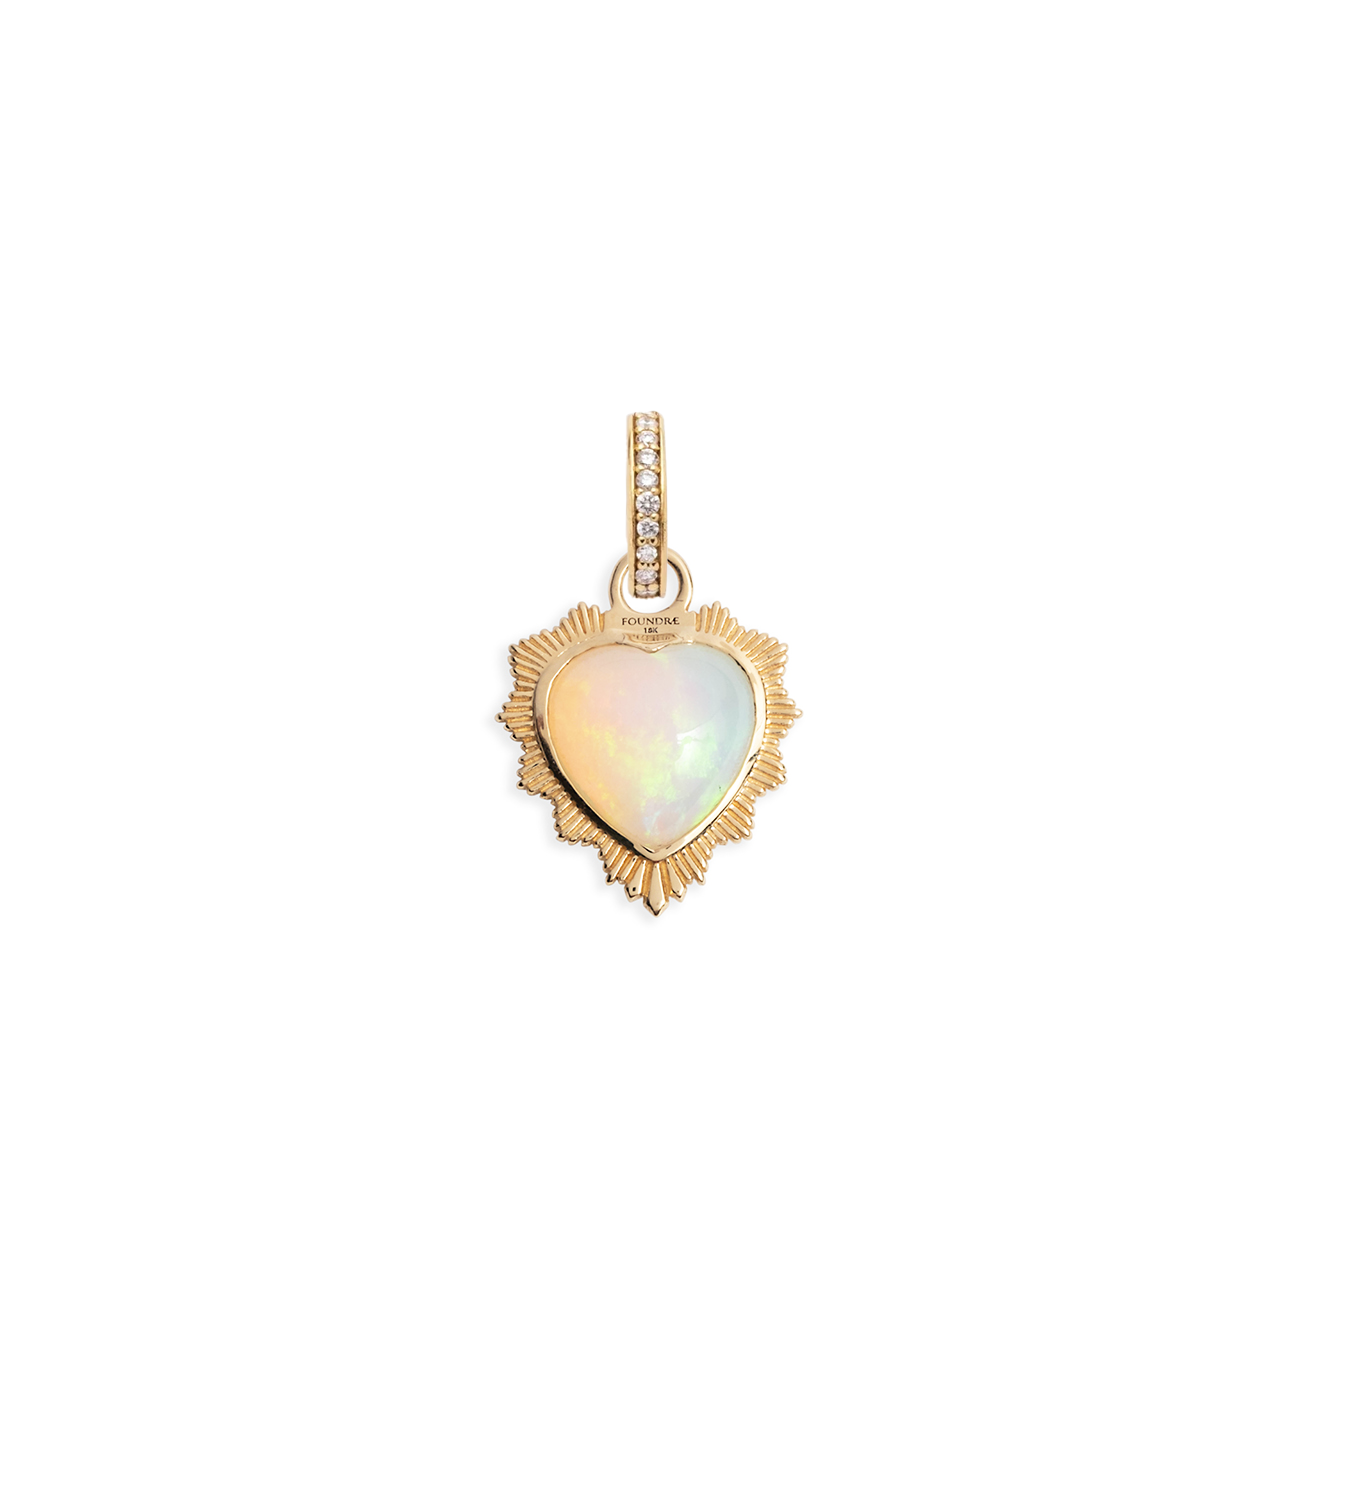 Gemstone Heart - Love : Opal with Oval Pushgate